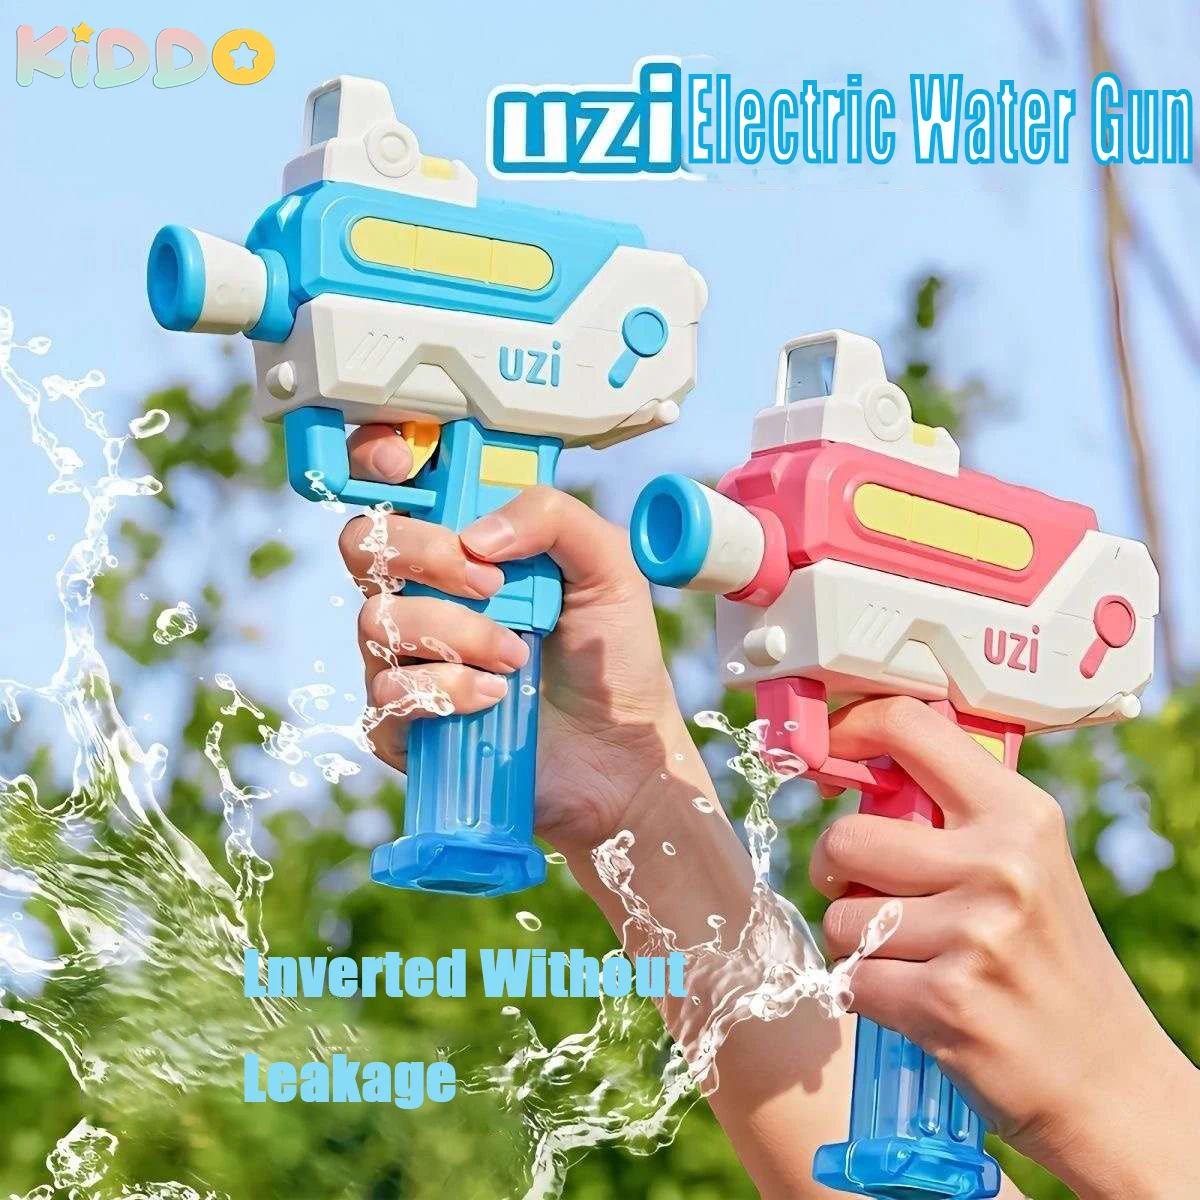 

Electric Water Gun Portable High Pressure Automatic Summer Beach Outdoor Pool Fight Fantasy Toys for Boys Children's Day Gifts